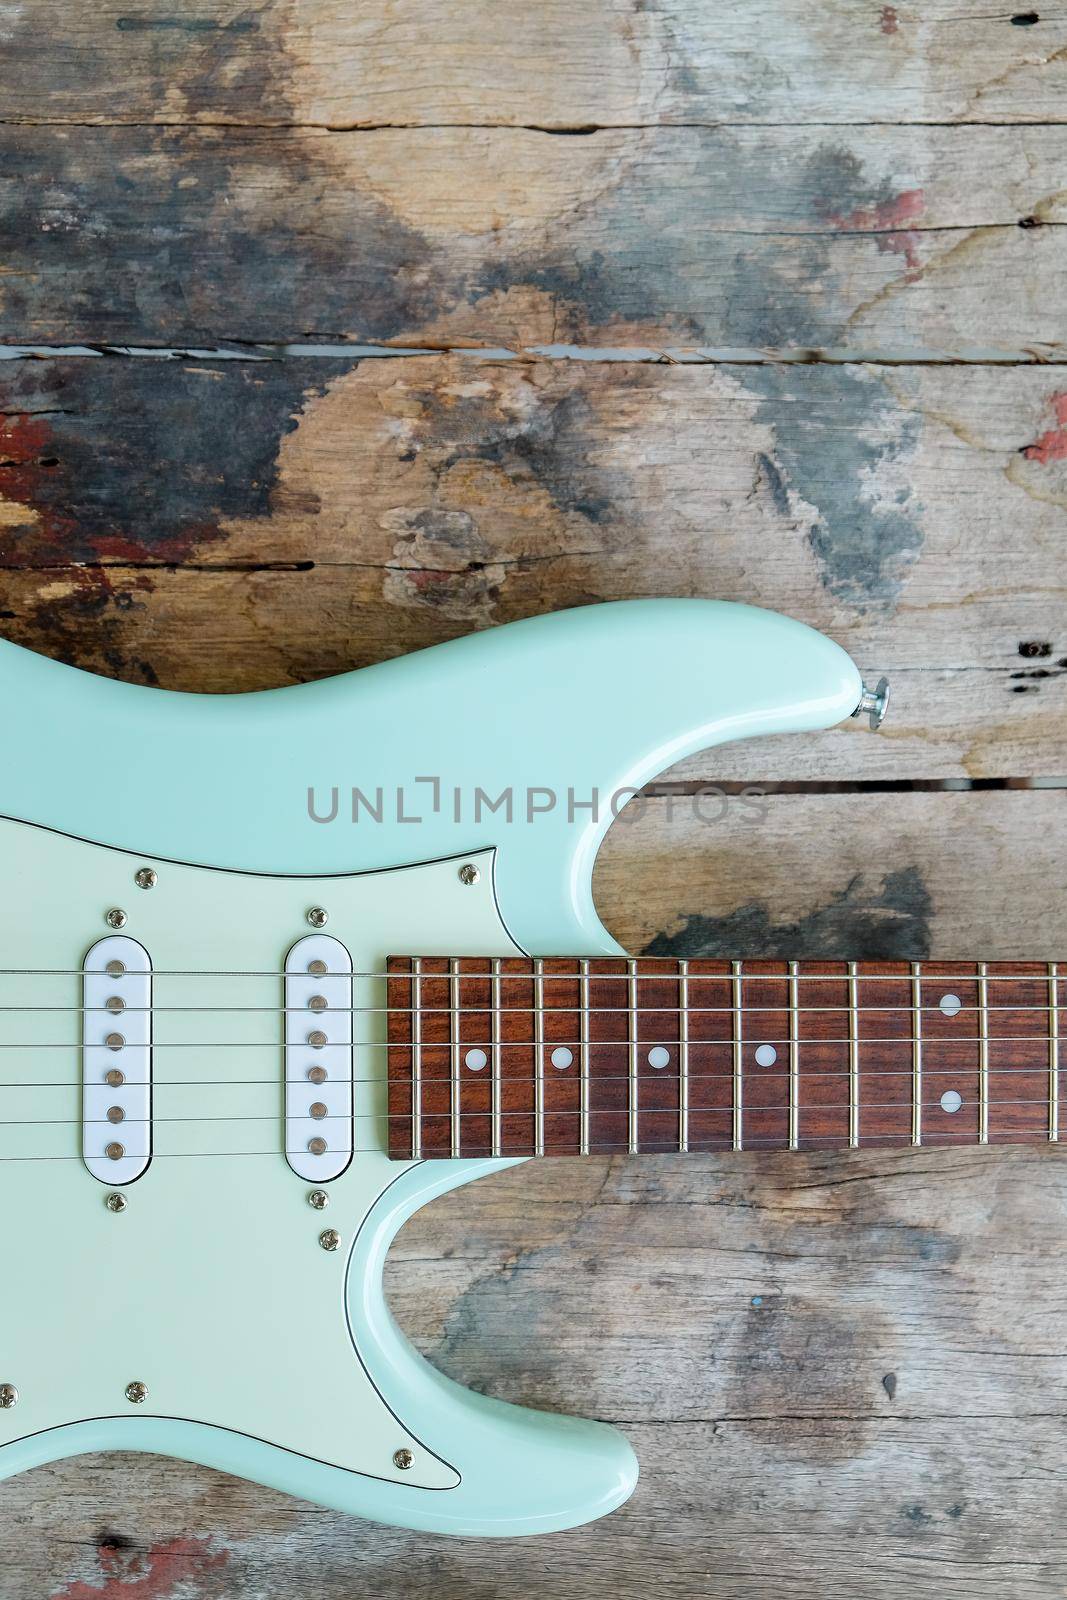 Detail of Mint Green Electric Guitar on a wood background.